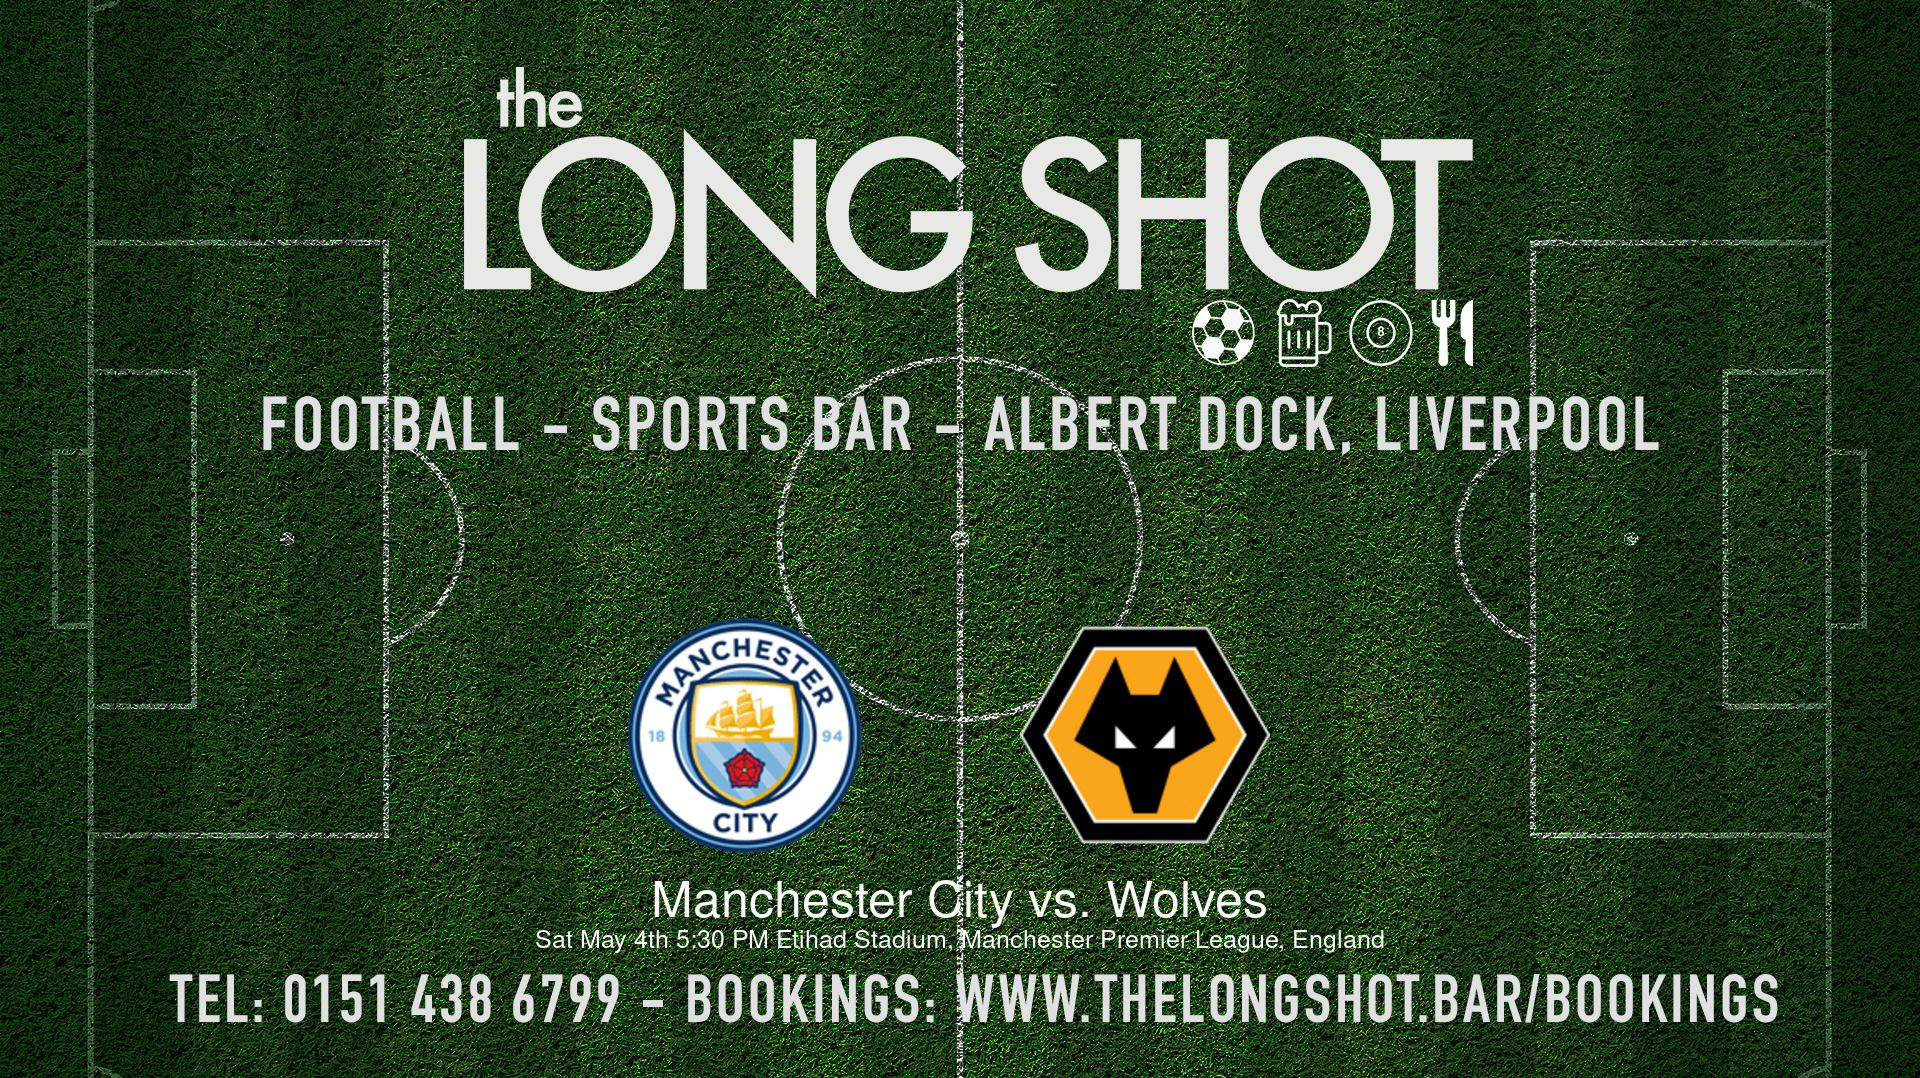 Event image - Manchester City vs. Wolves